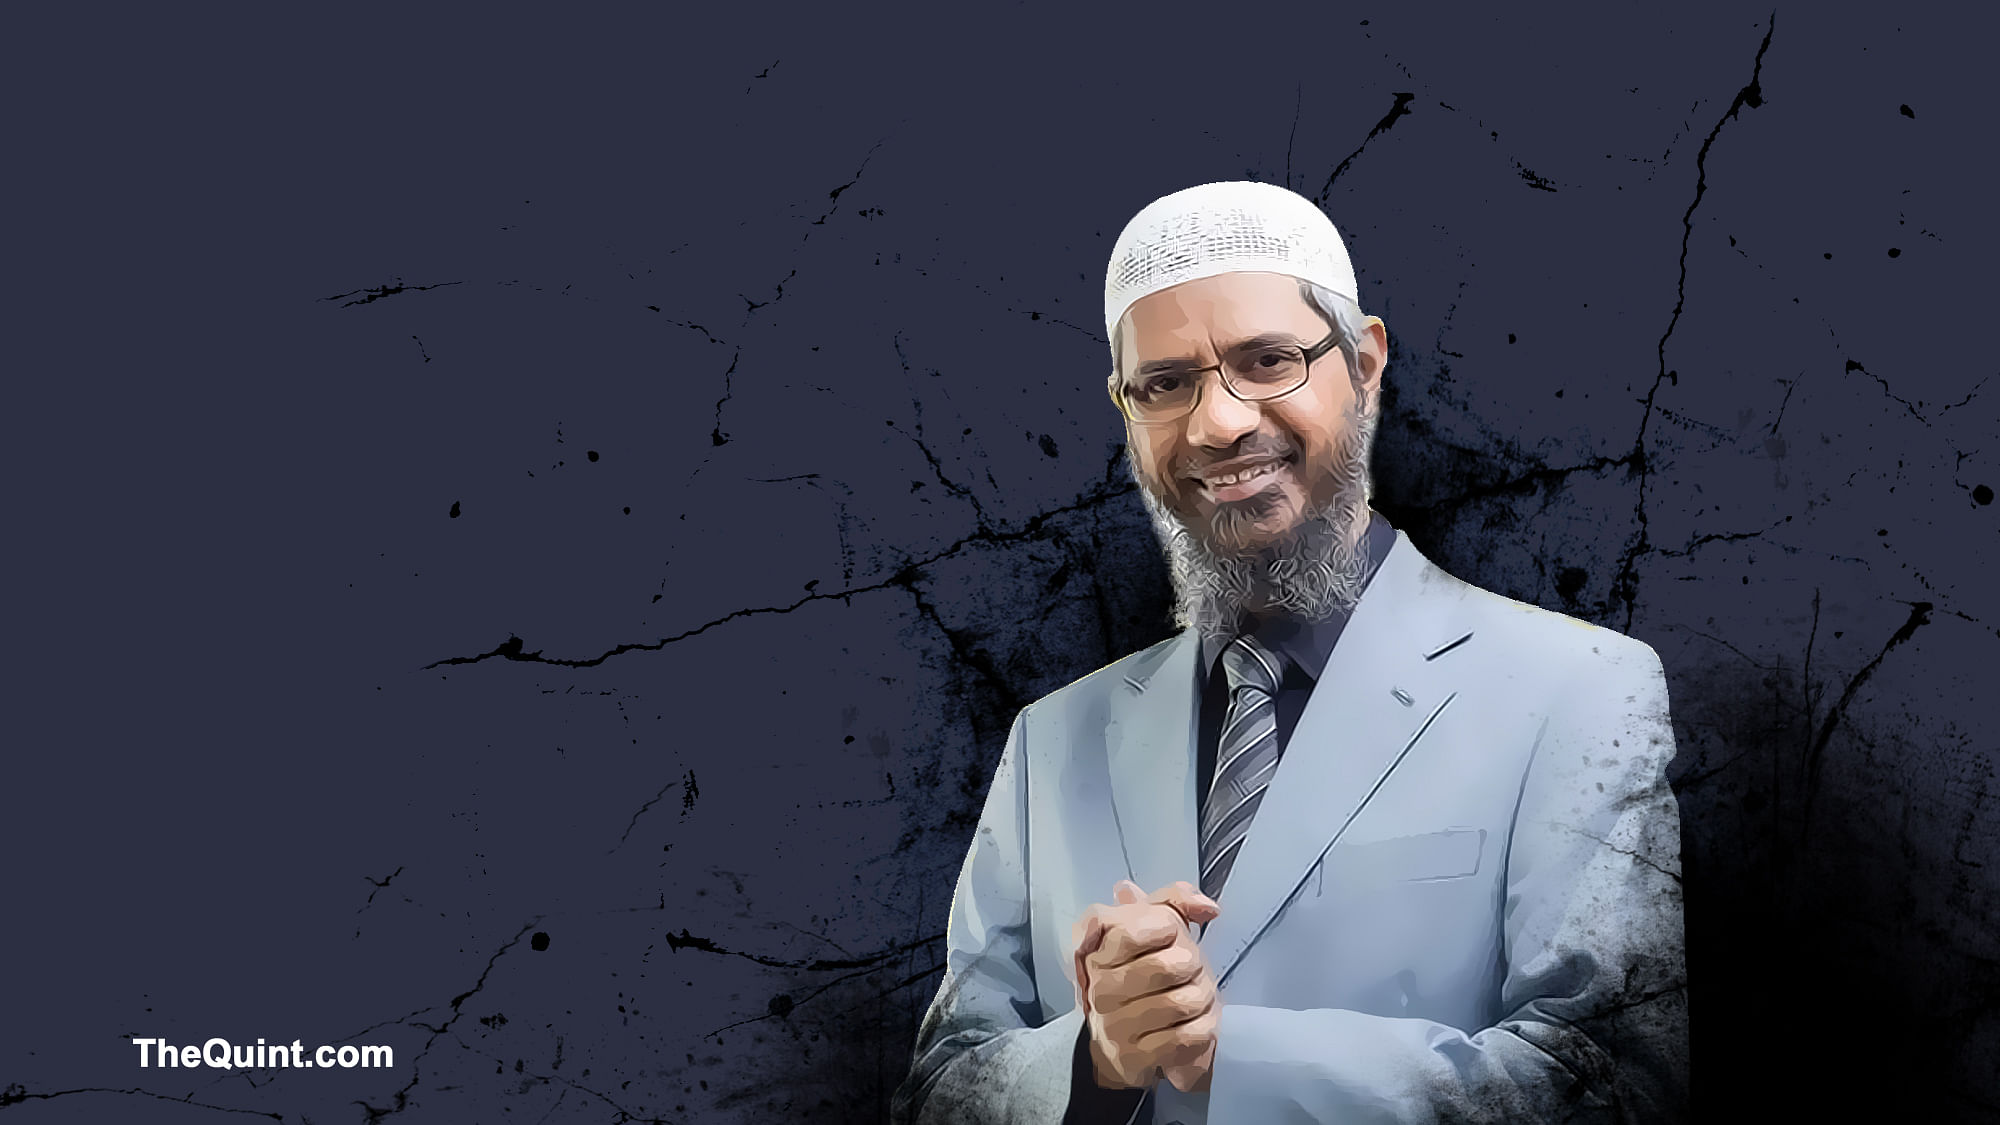 The Mumbai police have reasons to believe that Zakir Naik’s organisation converted several people to Islam. (Photo: <b>The Quint</b>)